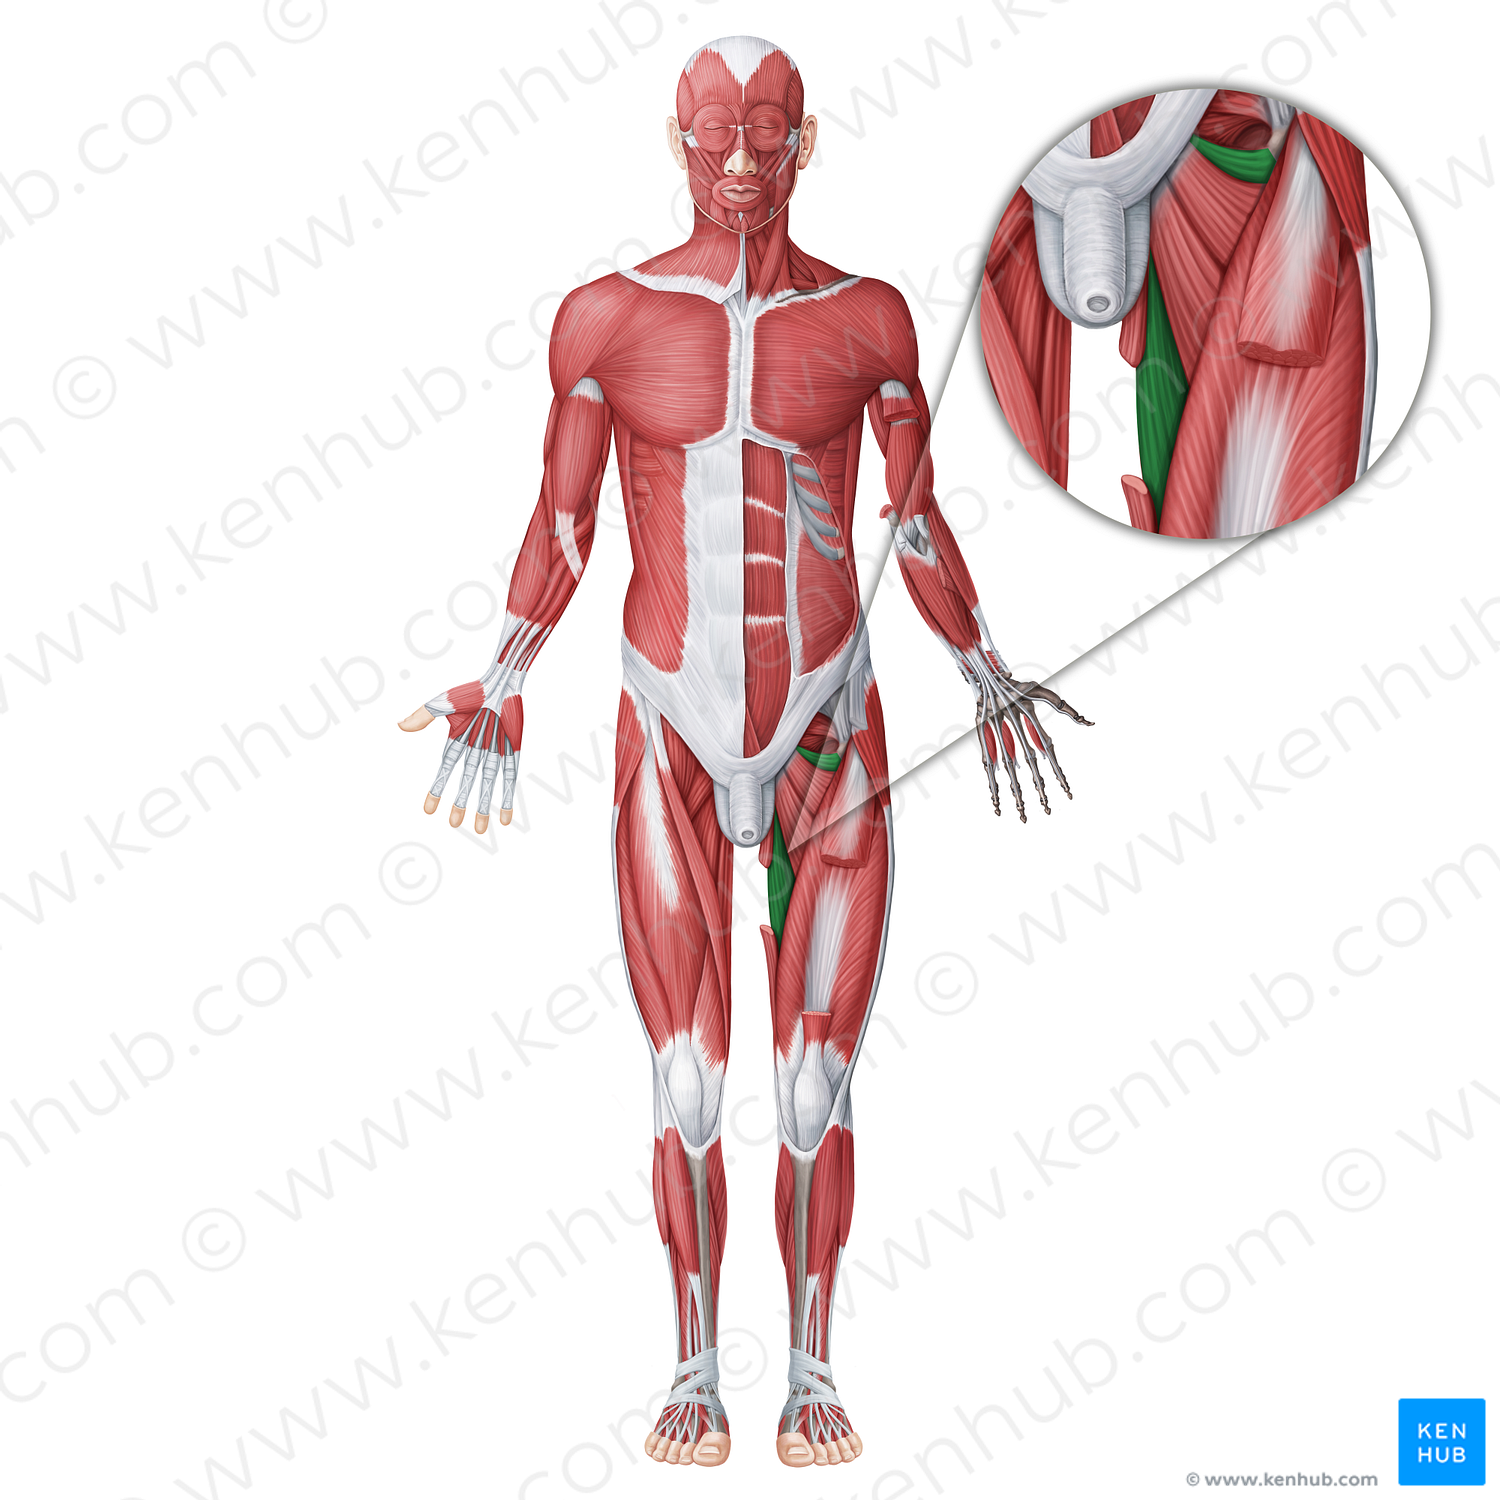 Adductor magnus muscle (#18640)